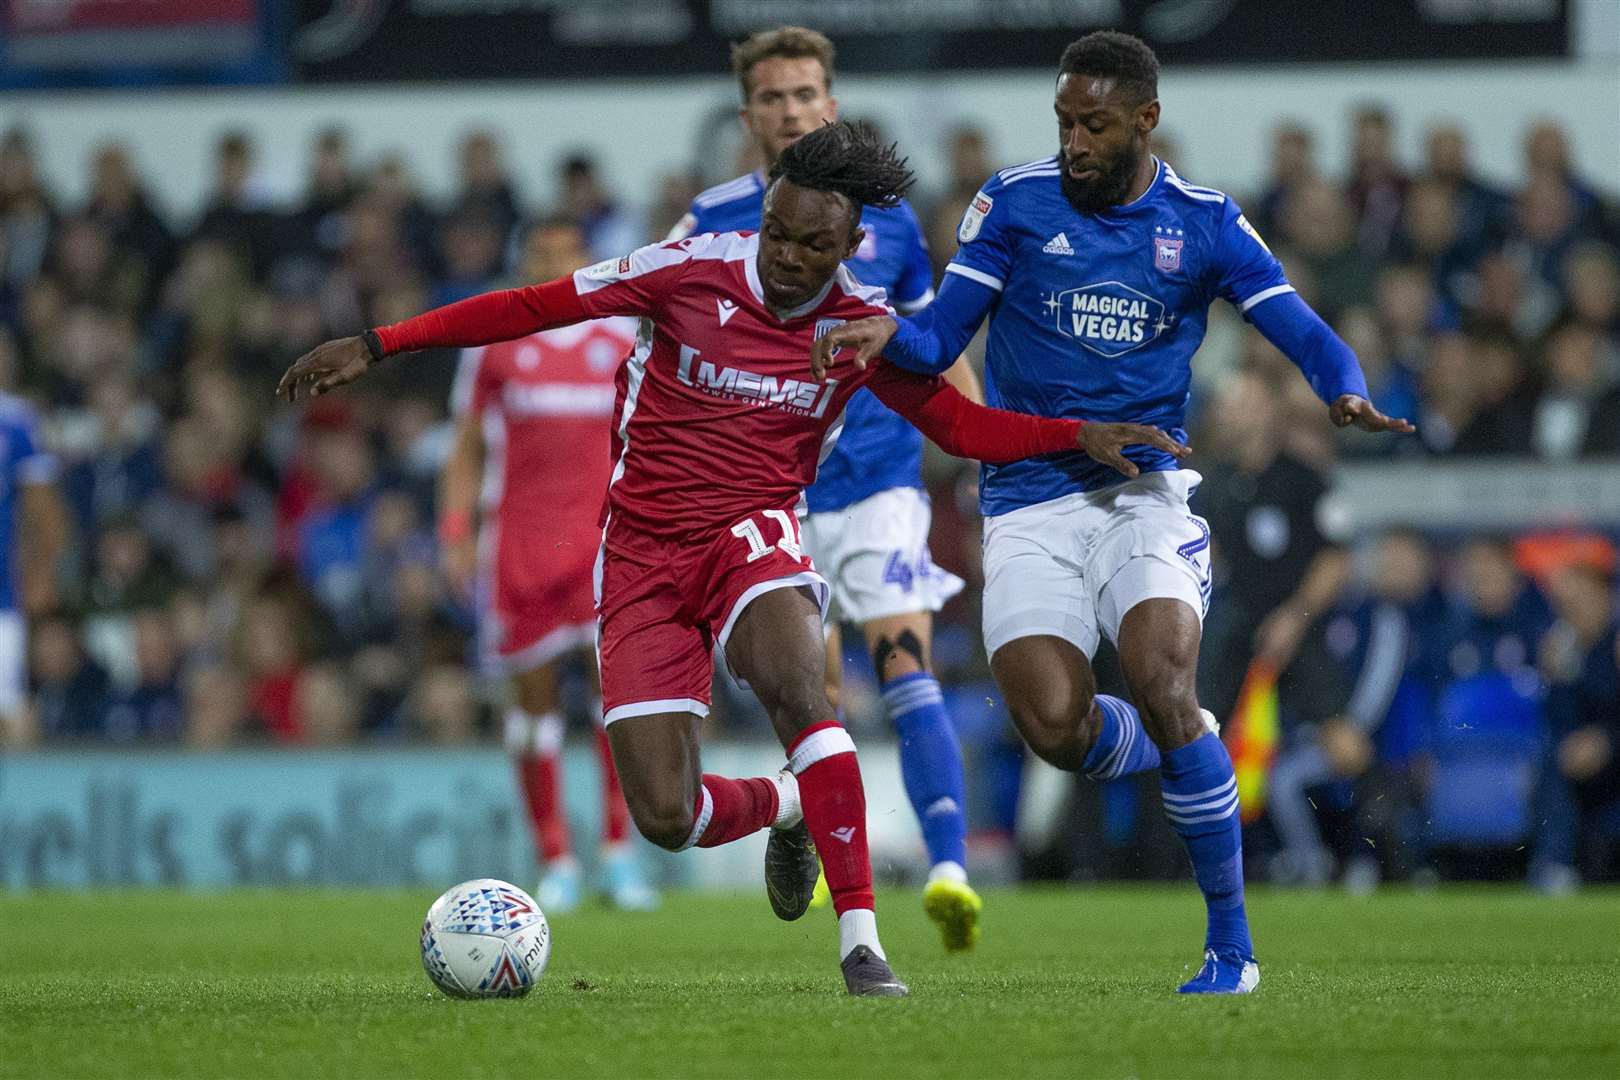 Gillingham were in action at Ipswich in the EFL Trophy on Tuesday but a weakened side lost heavily Picture: @KentProImages